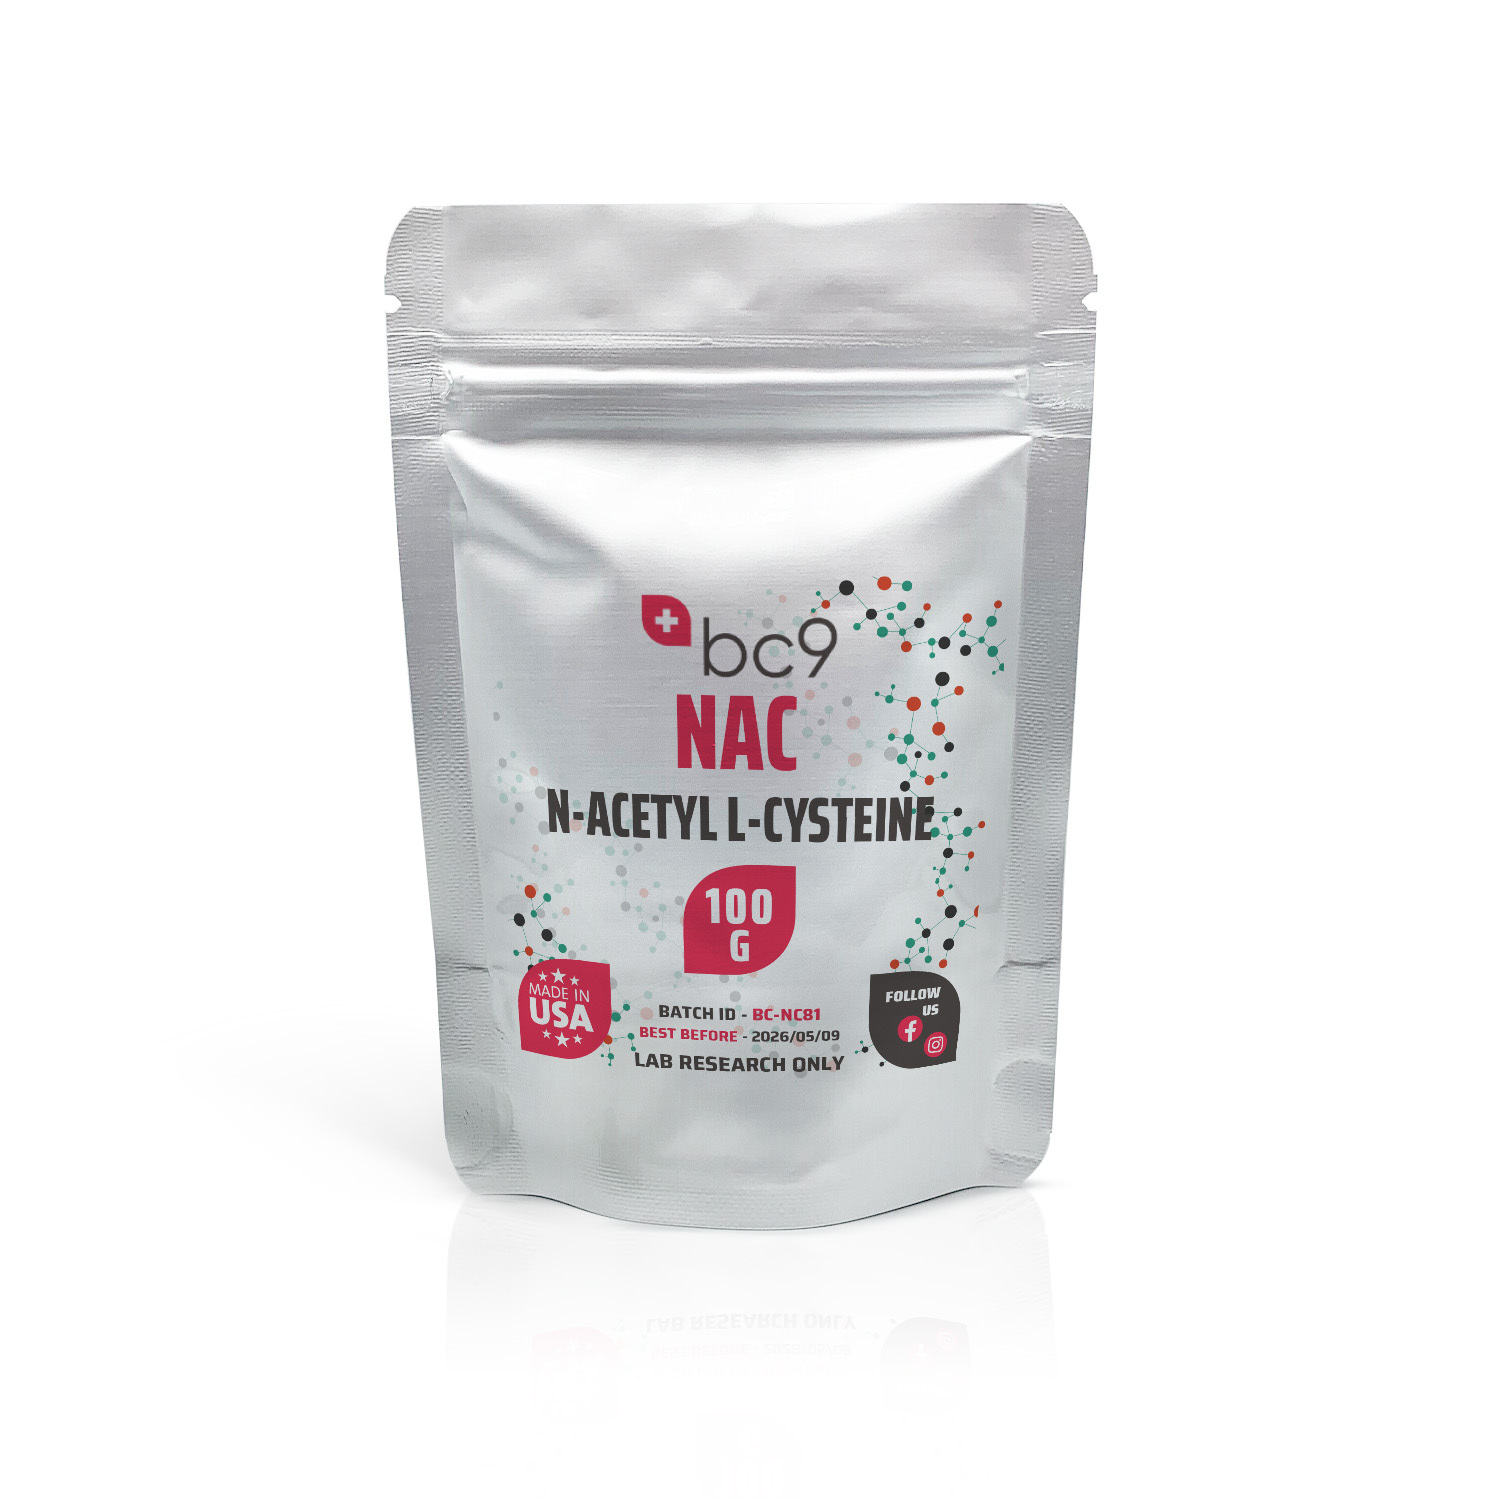 N-Acetyl L-Cysteine (NAC) for Sale | Fast Shippping | BC9.org